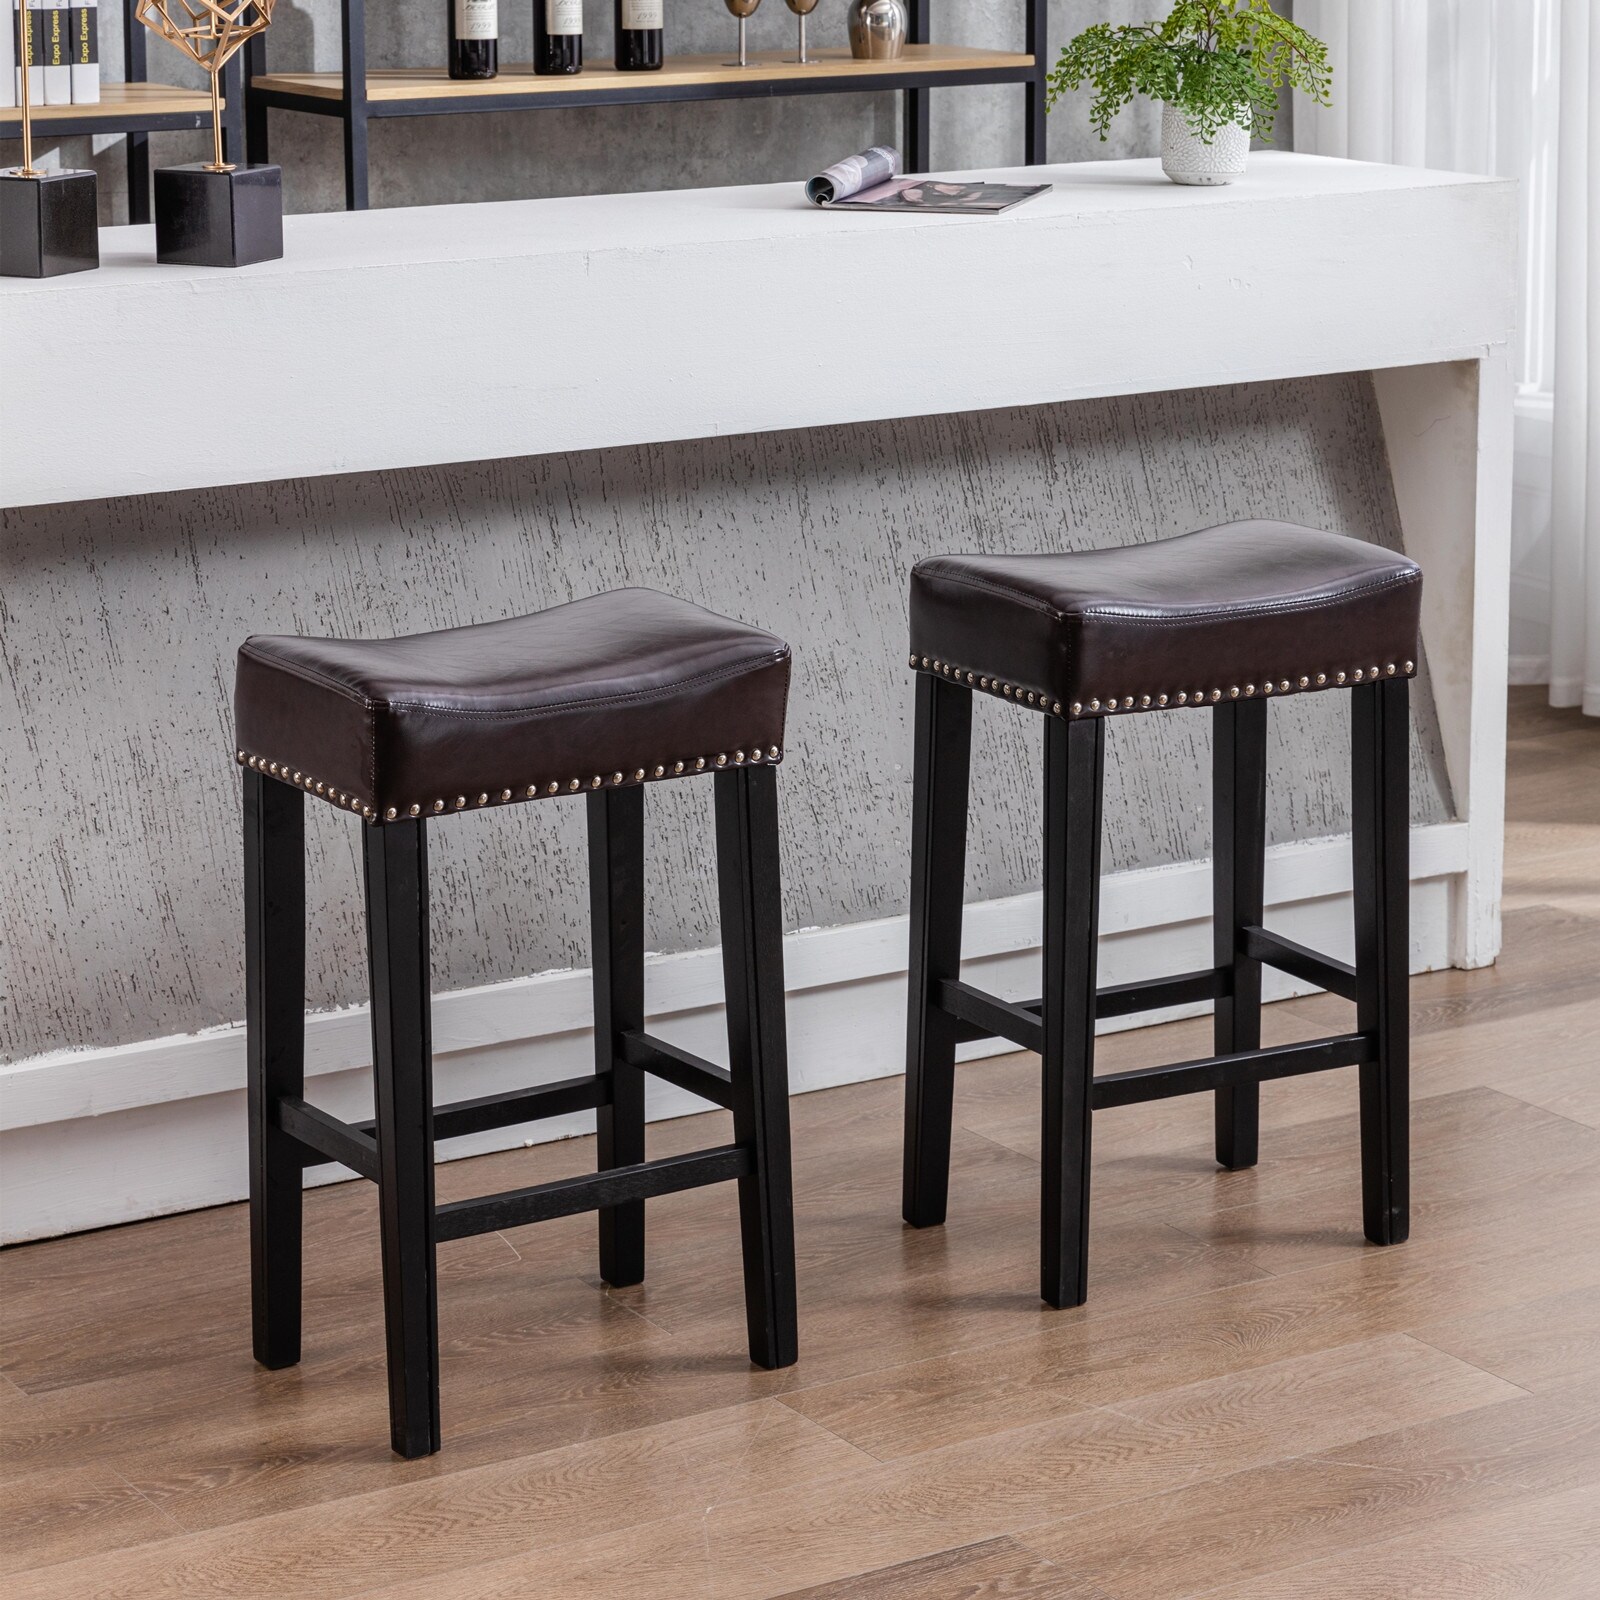 Green Scenic Bar Stools for Kitchen Counter Backless Faux Leather Stools Farmhouse Island Chairs ( Set of 2)